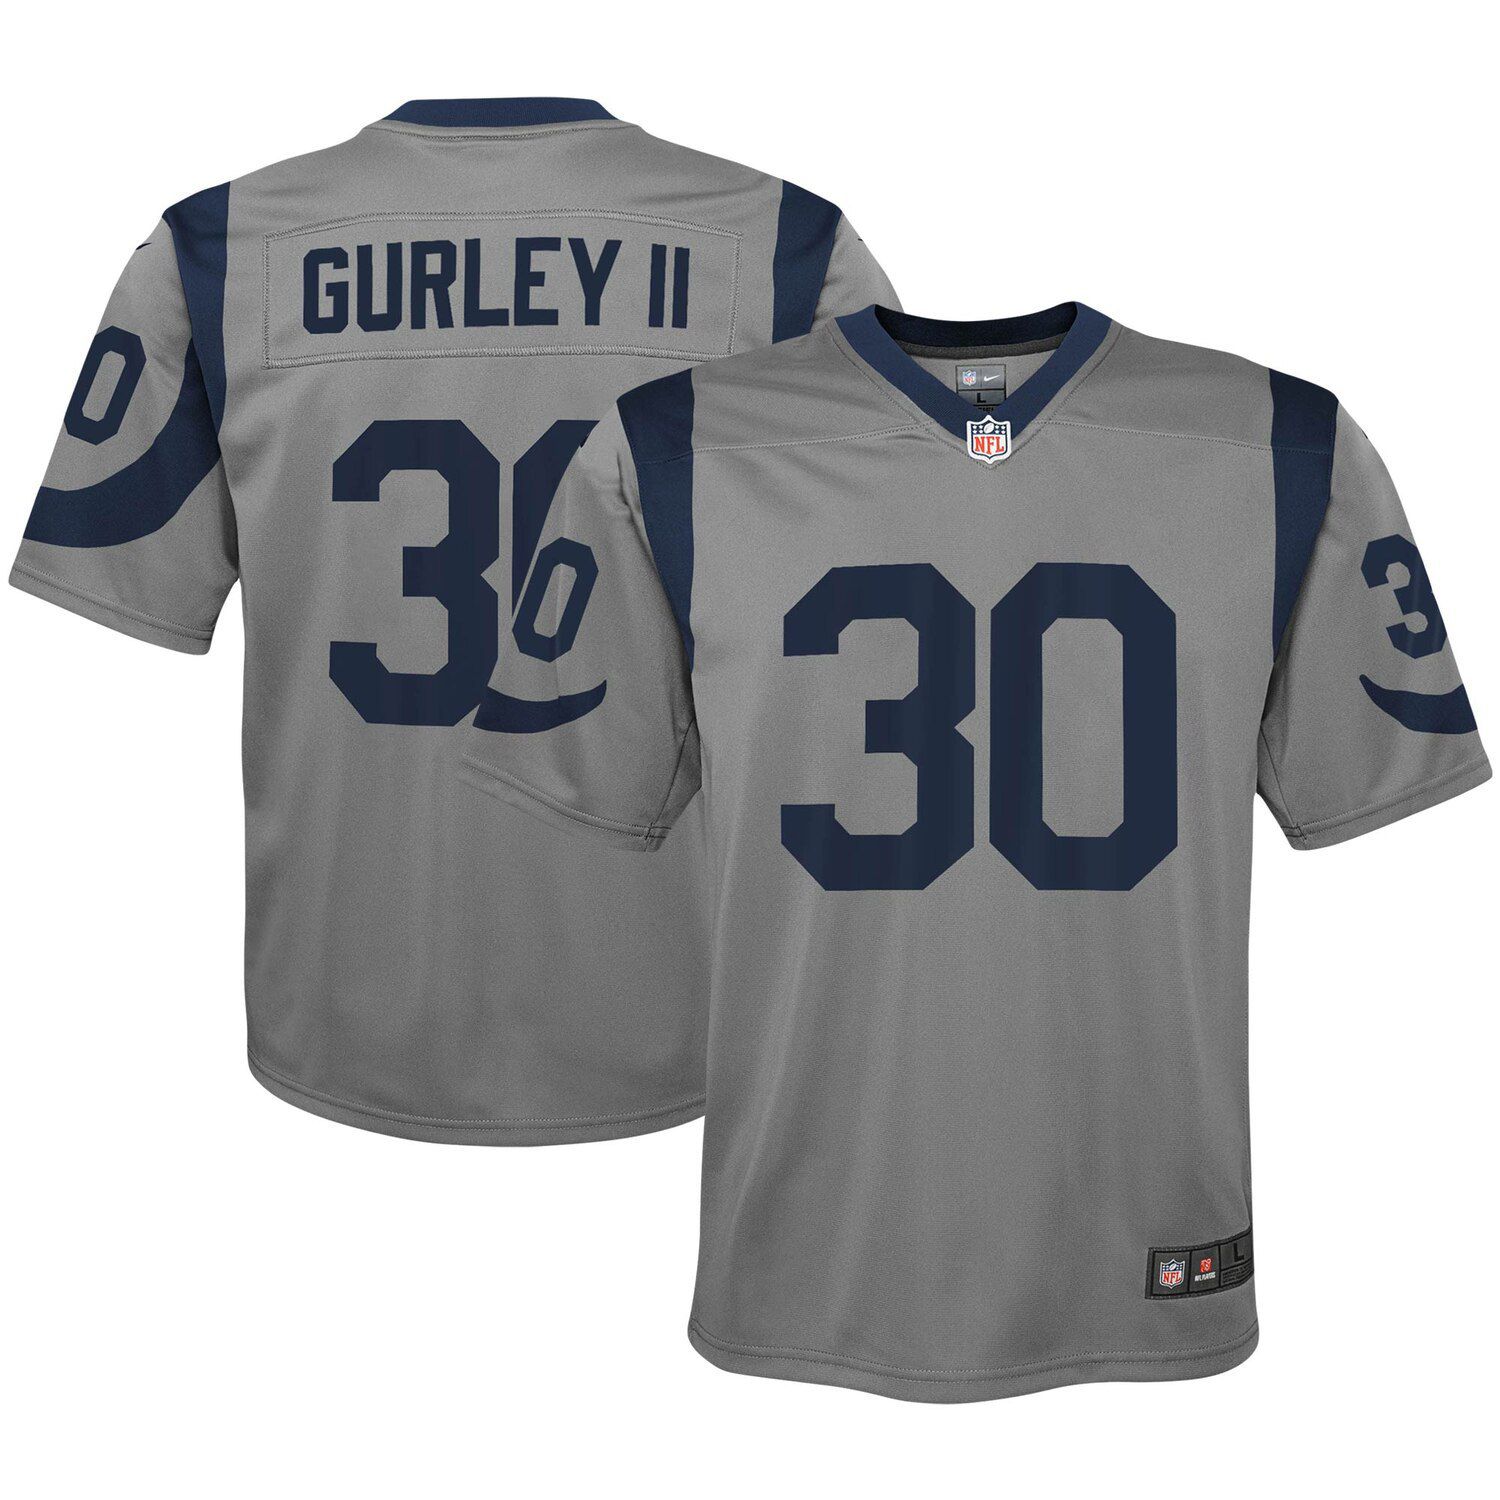 todd gurley jersey youth